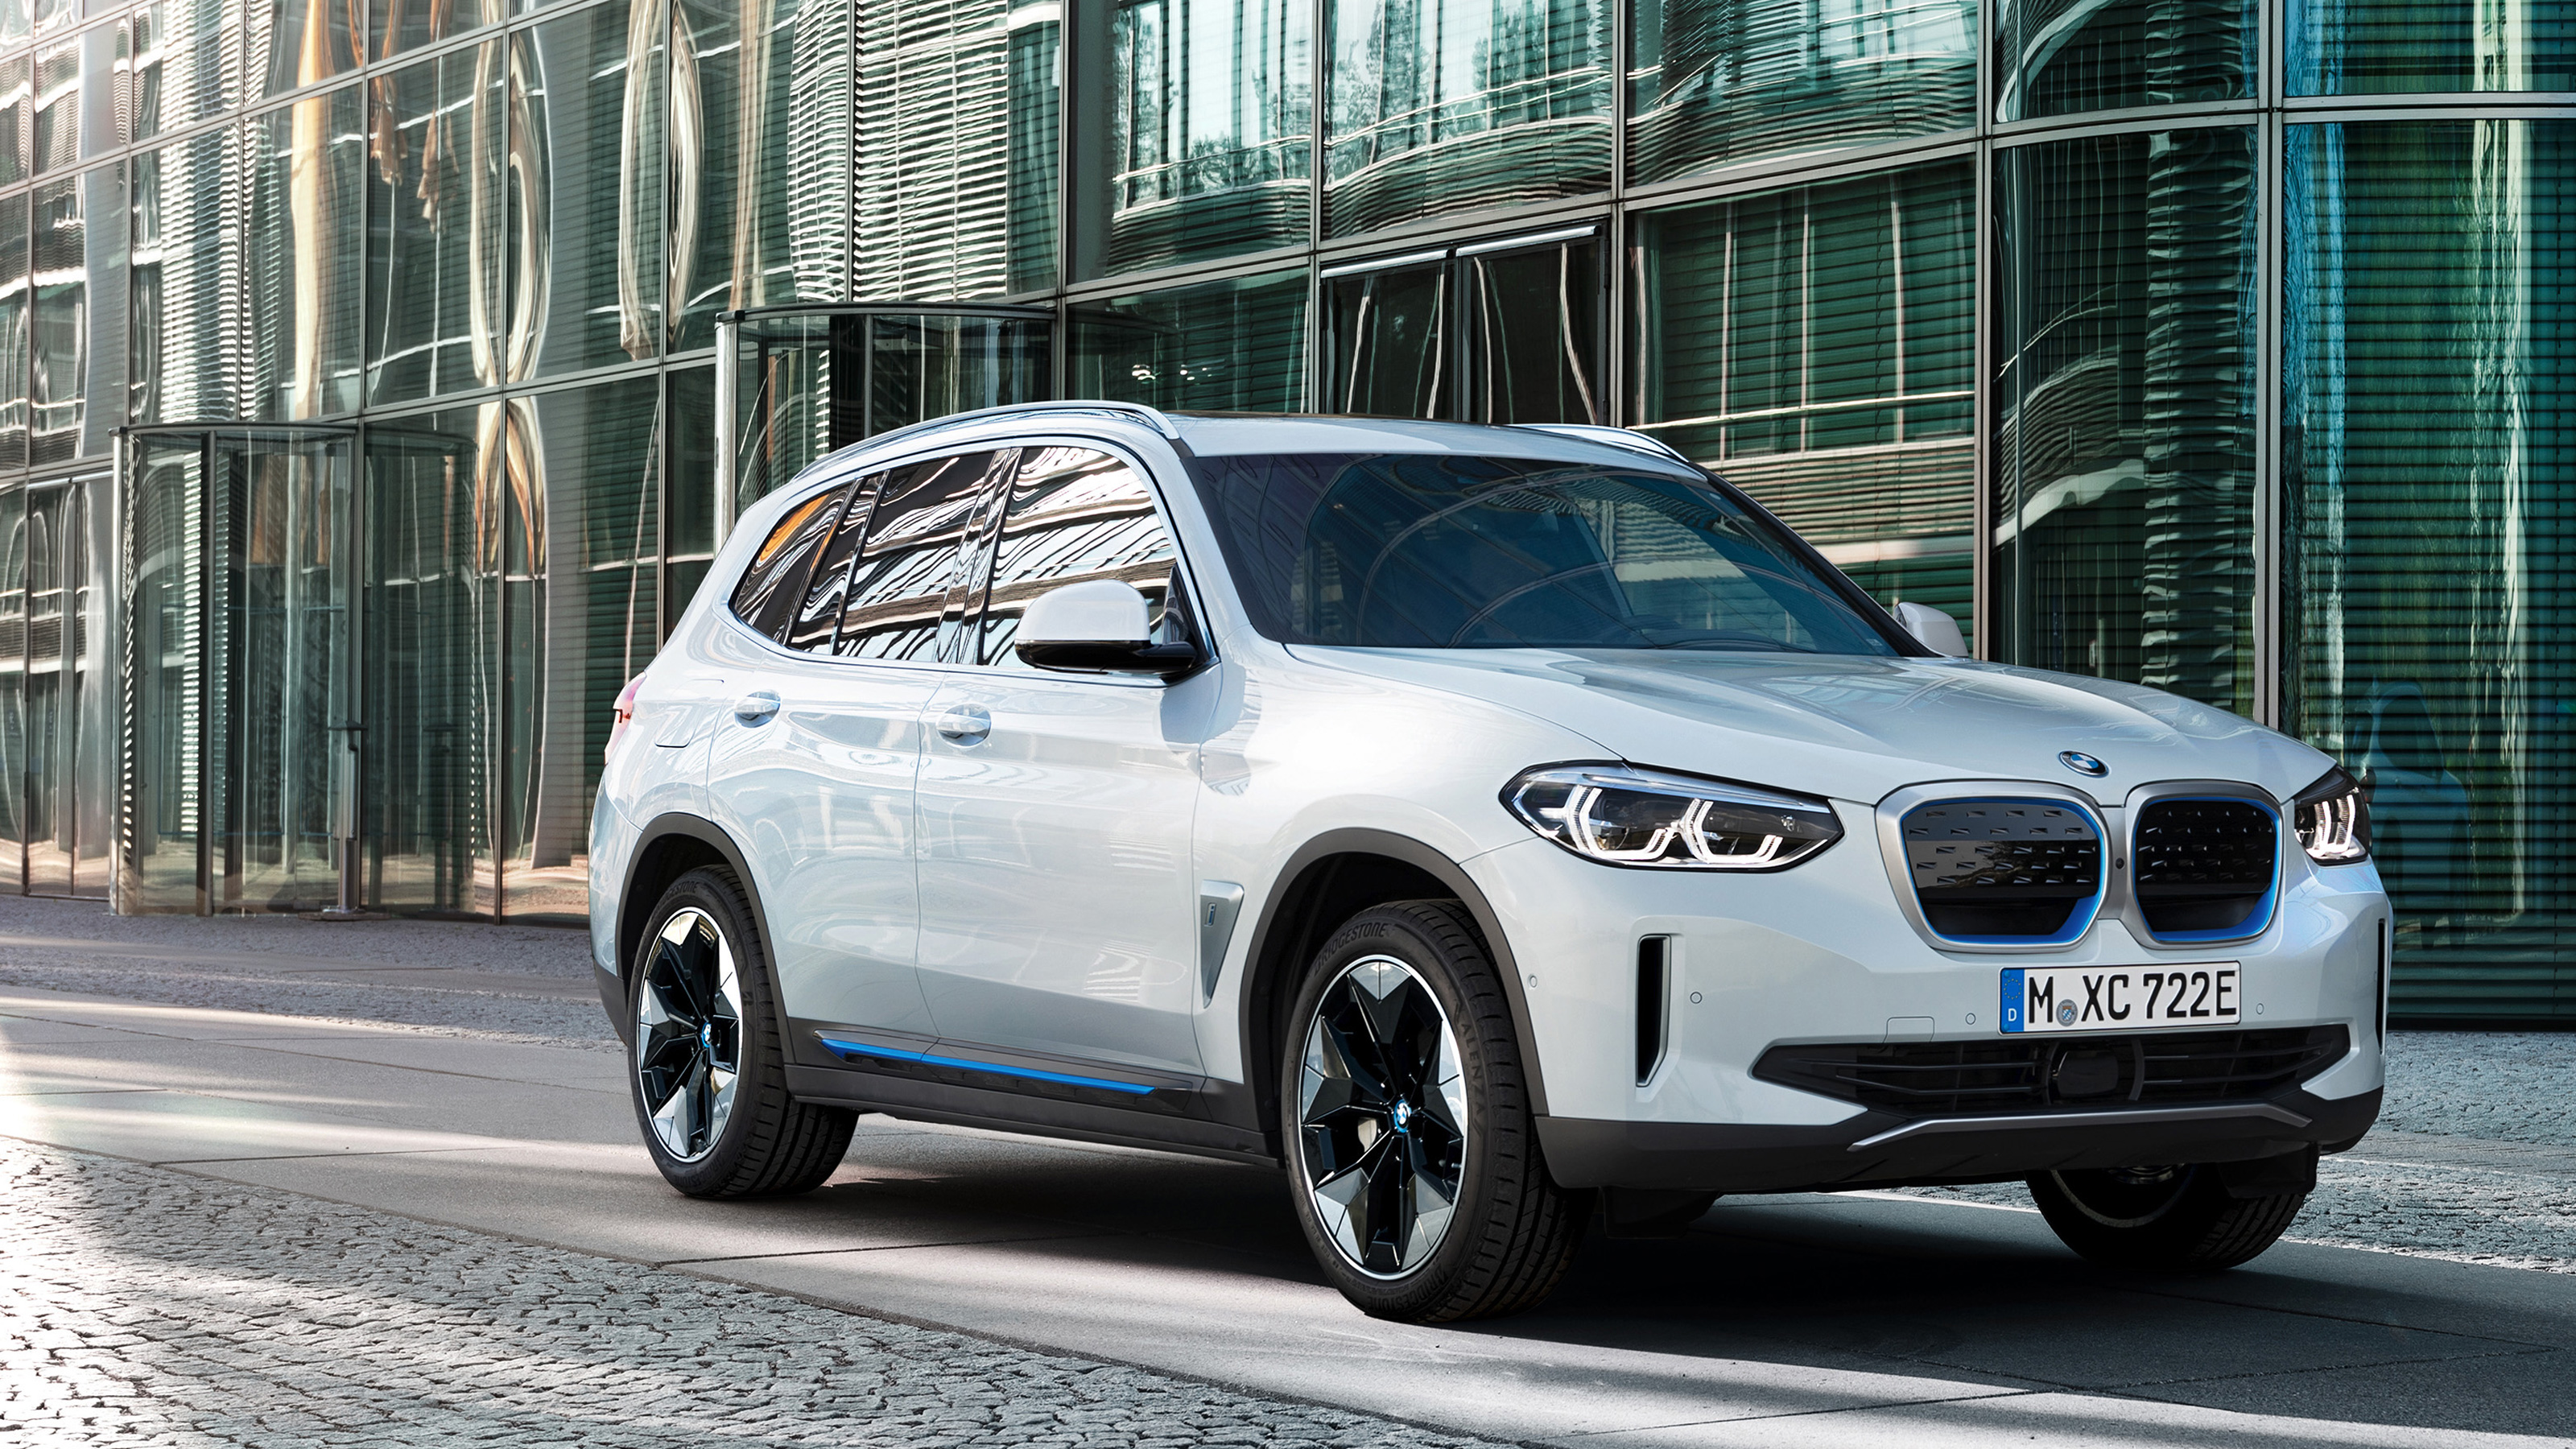 New 2021 BMW iX3 SUV plugs in with 285 miles of electric 